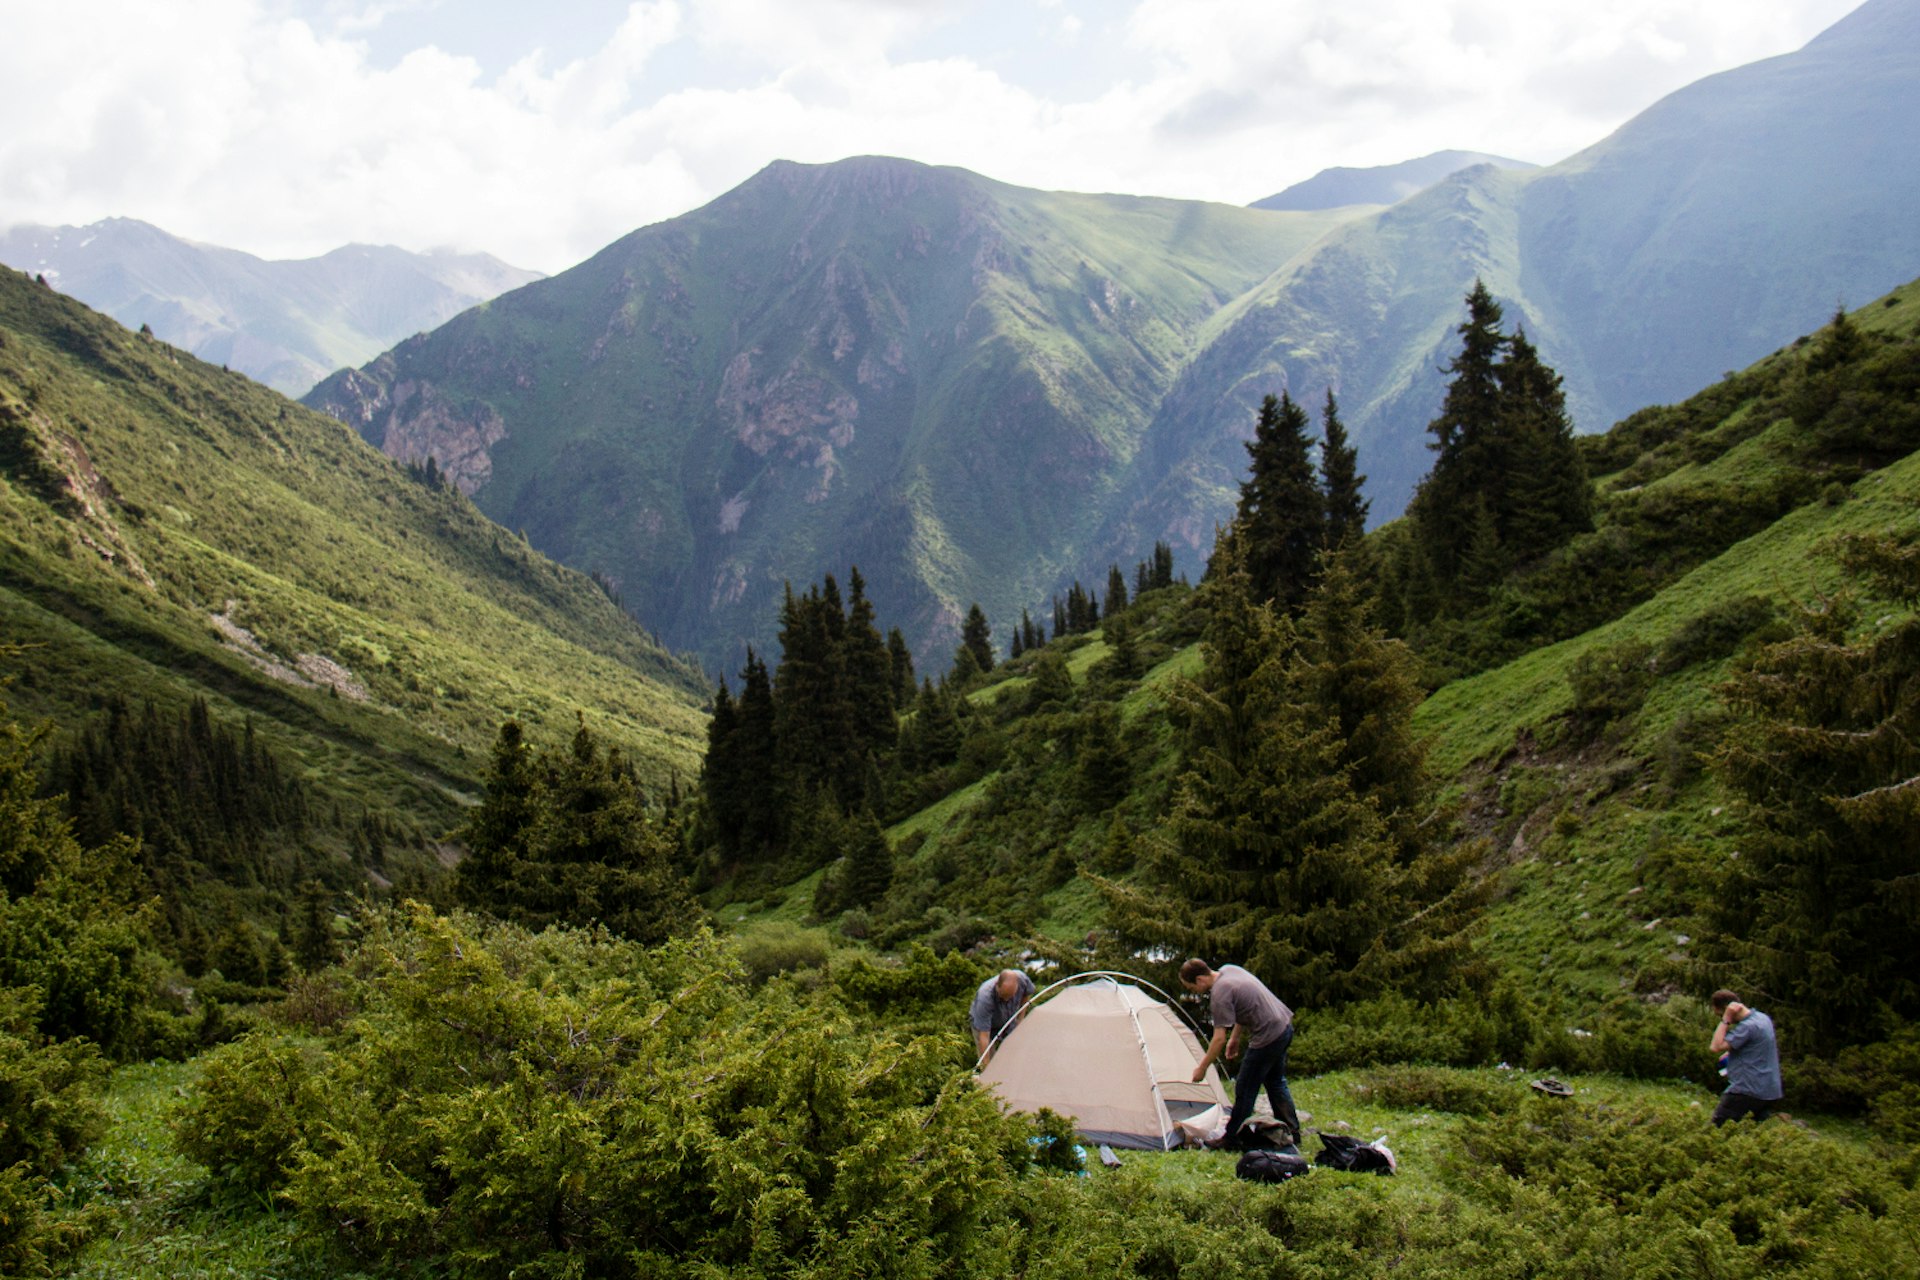 Pack it in for an unforgettable wild camping experience. Image by Stephen Lioy / Lonely Planet